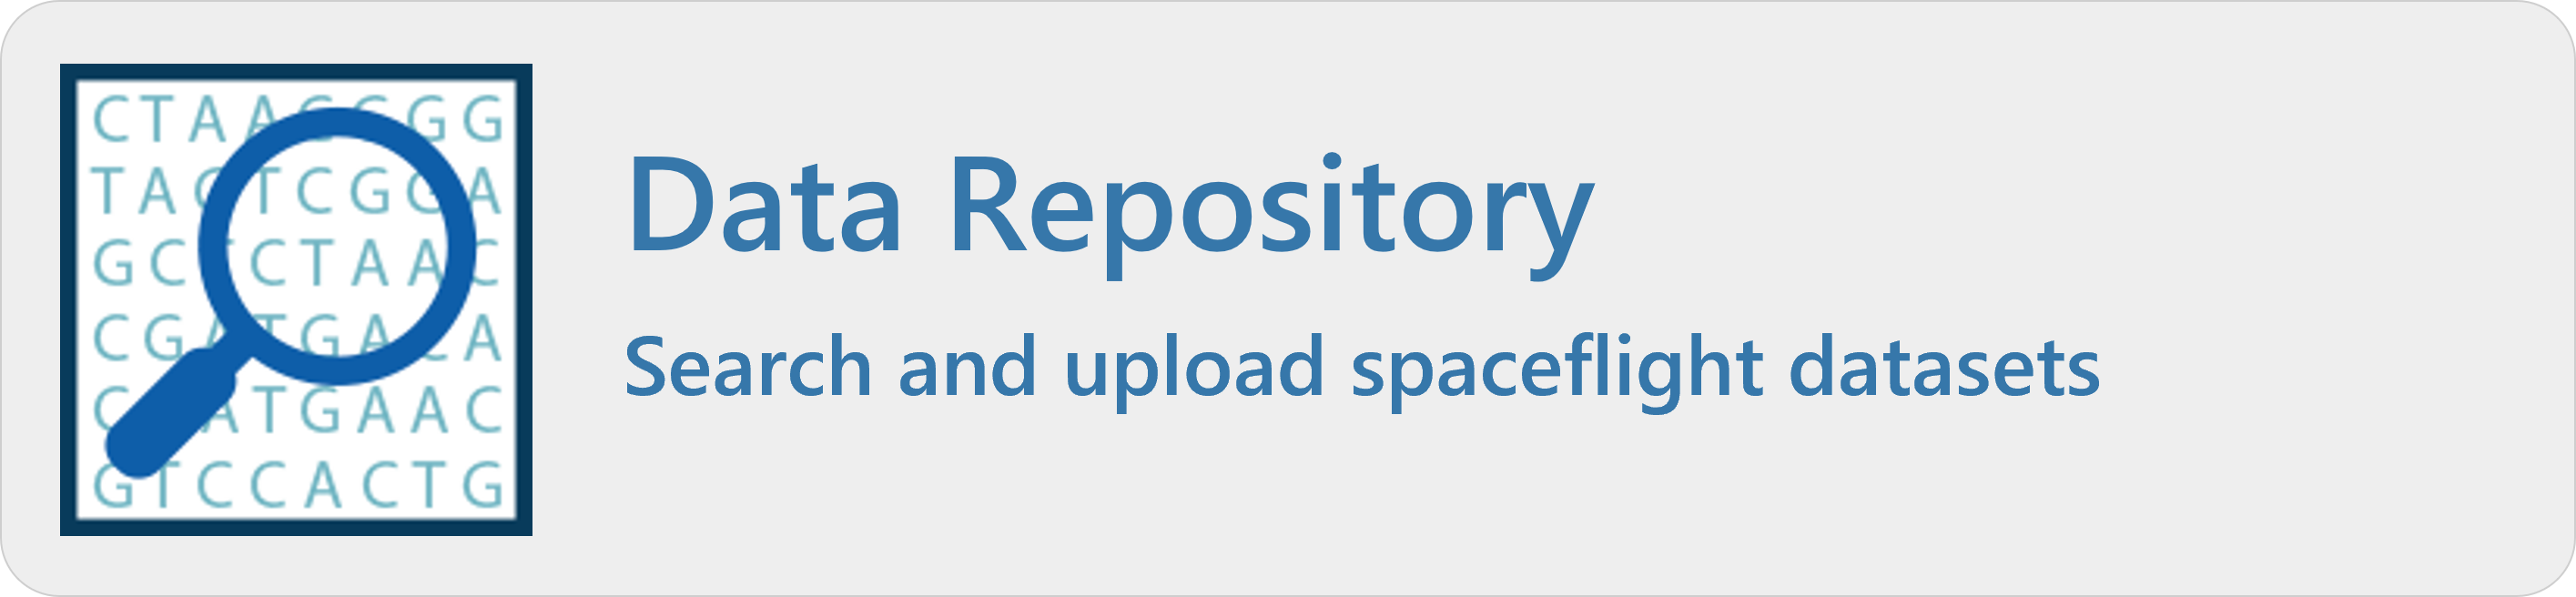 Data Repository - Search and upload spaceflight datasets